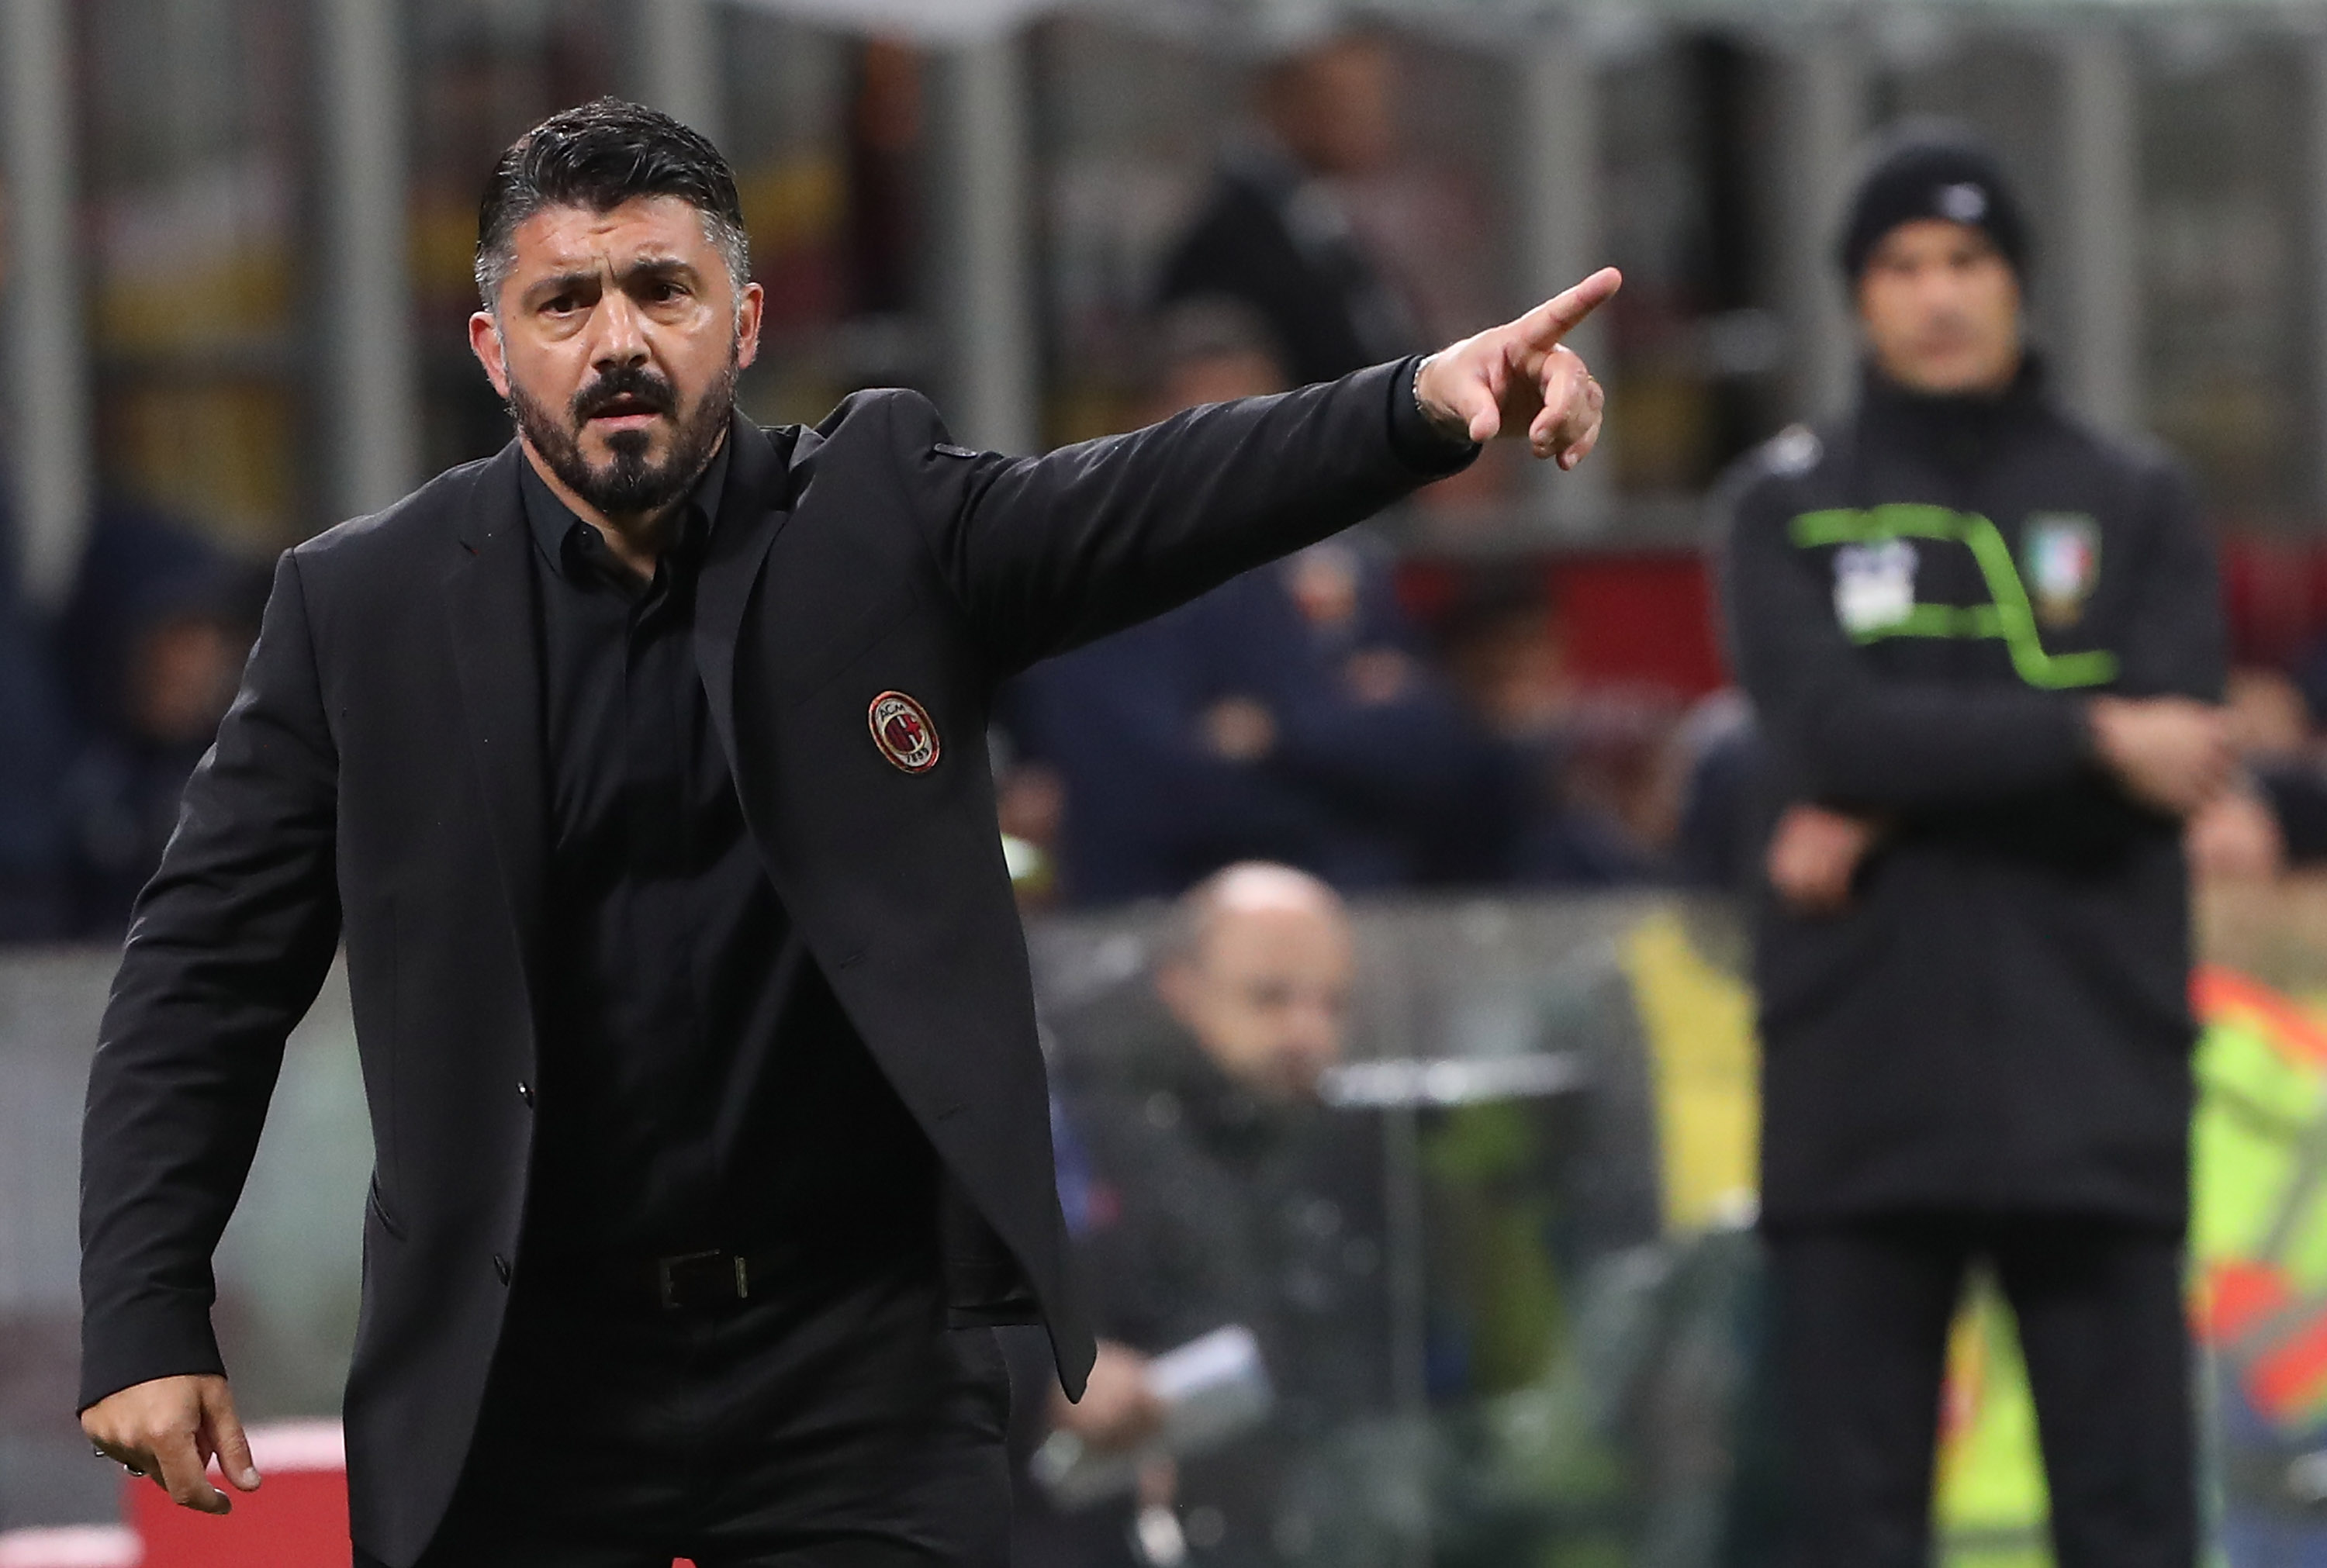 MILAN, ITALY - OCTOBER 31: AC Milan coach Gennaro Gattuso gestures during the serie A match between AC Milan and Genoa CFC at Stadio Giuseppe Meazza on October 31, 2018 in Milan, Italy. (Photo by Marco Luzzani/Getty Images)